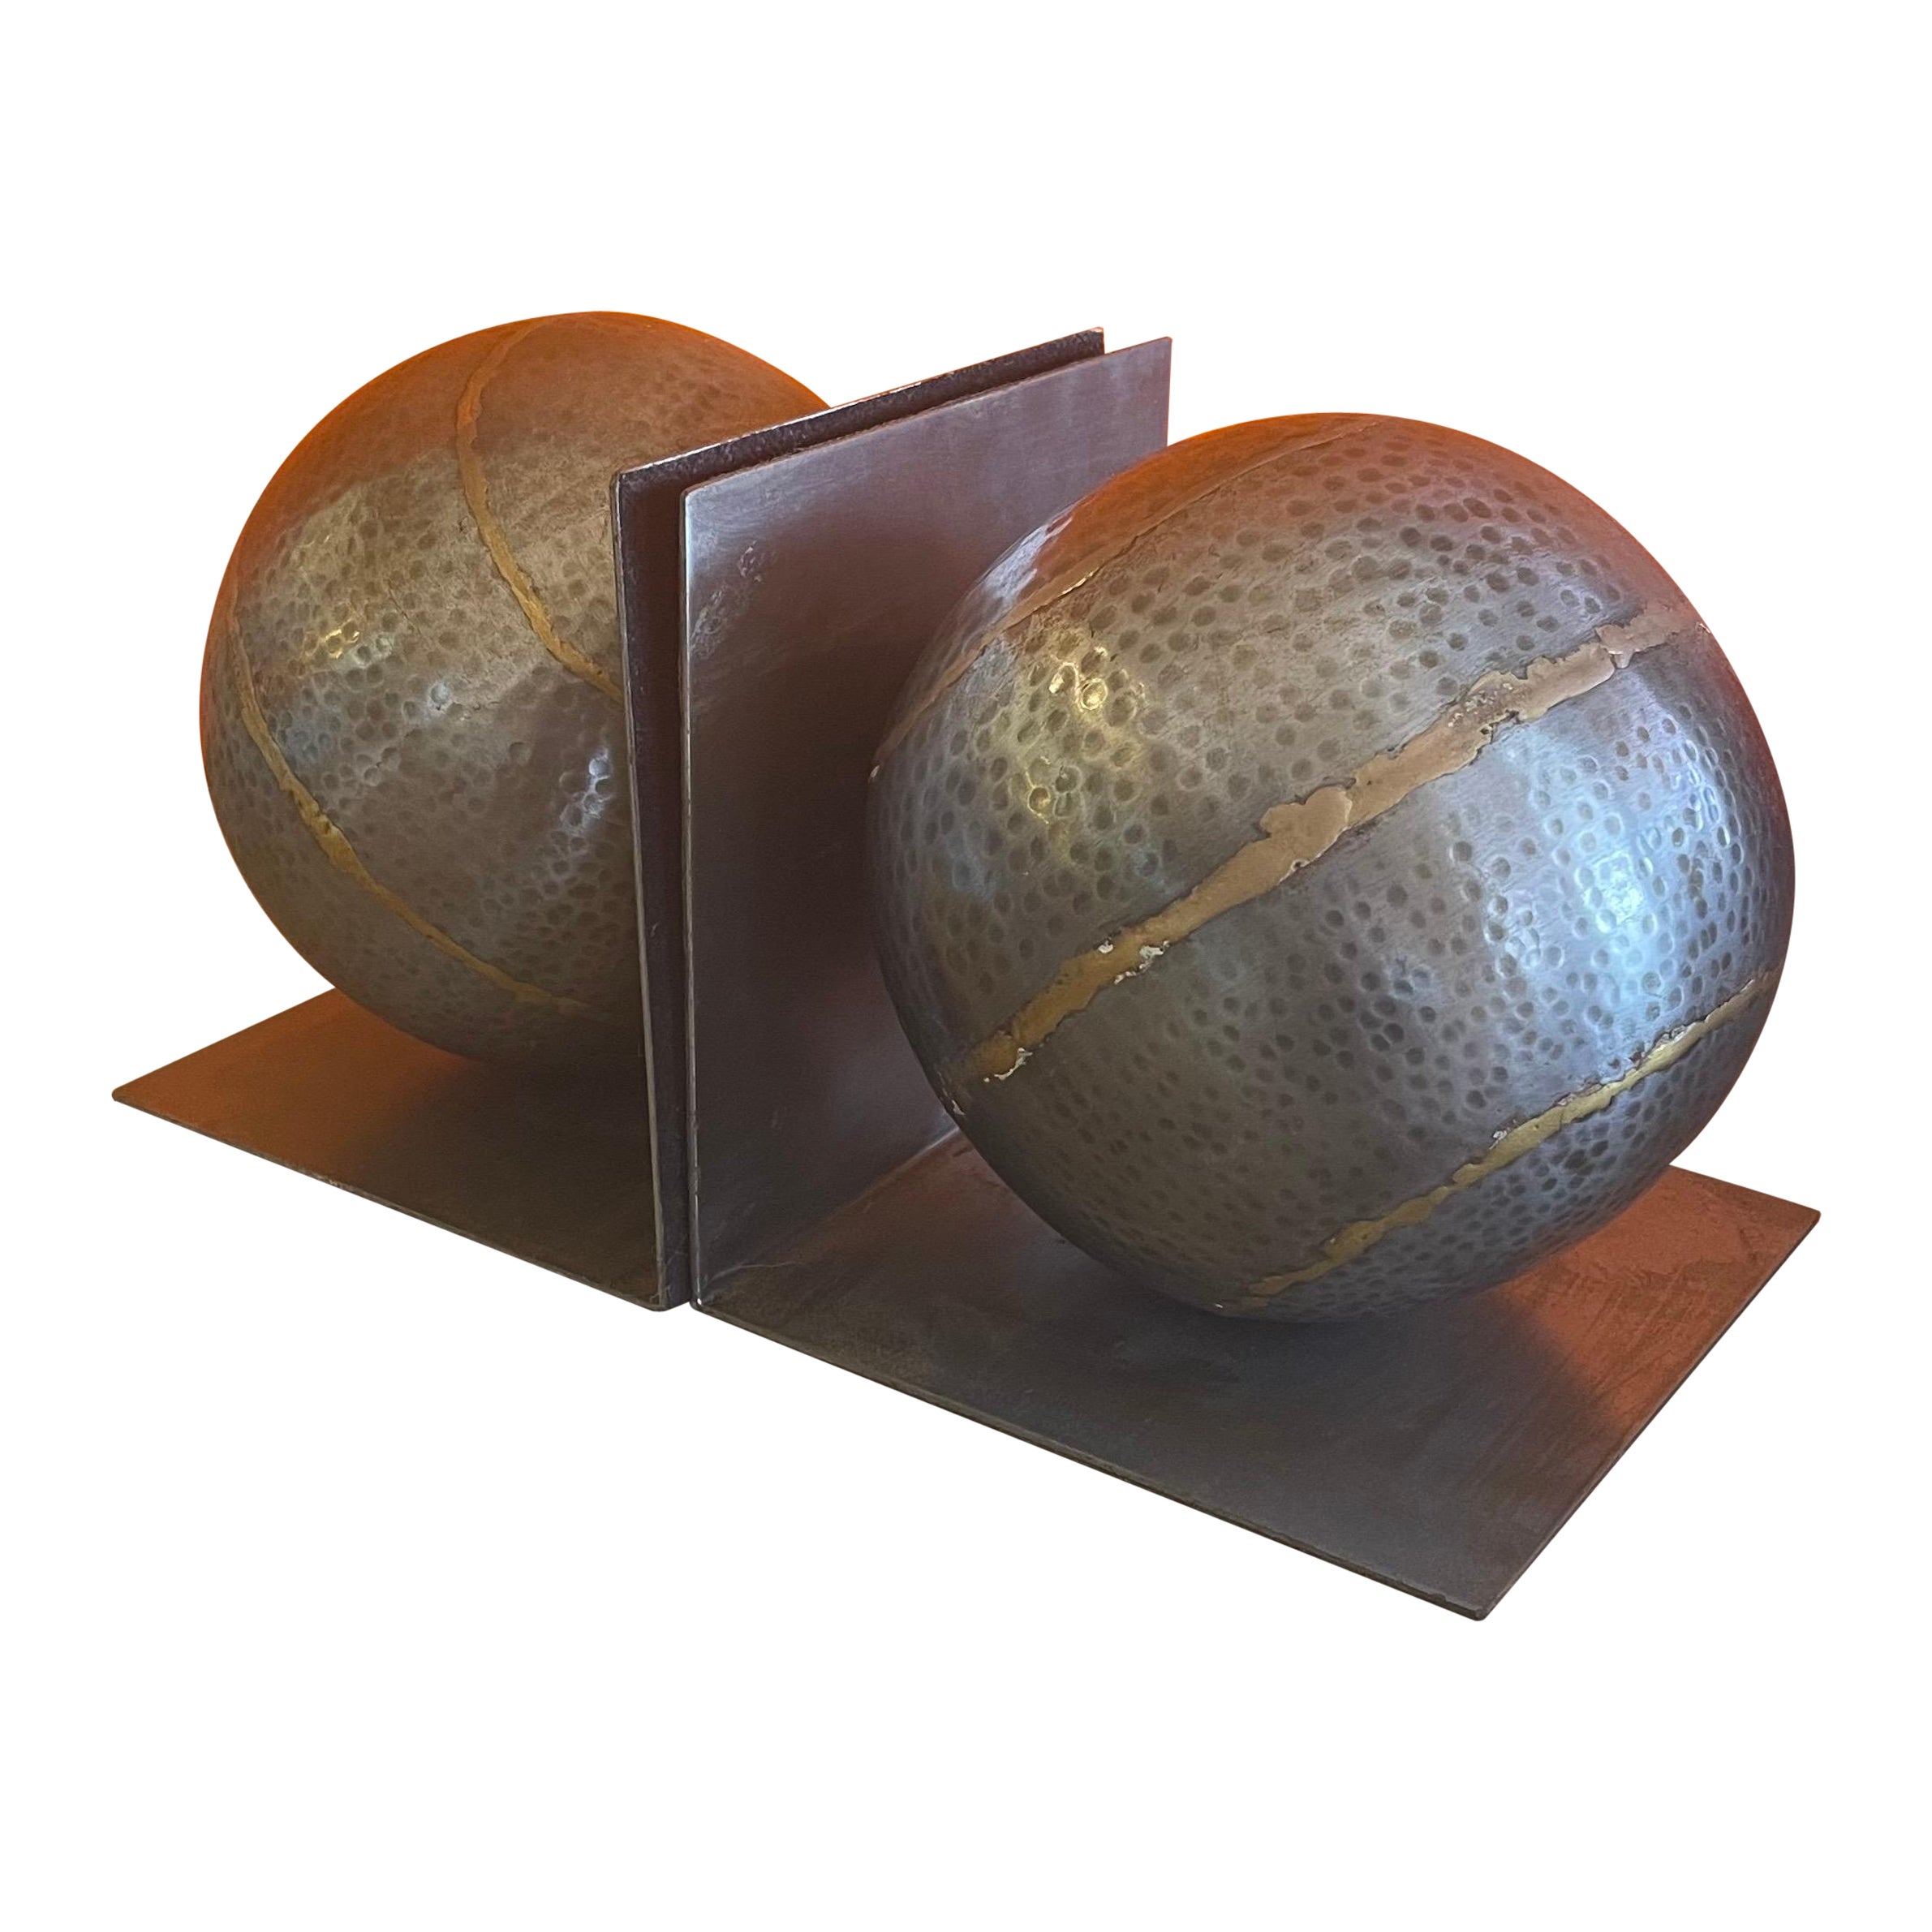 Pair of Minimalist Bookends in Zinc and Brass by Arterriors